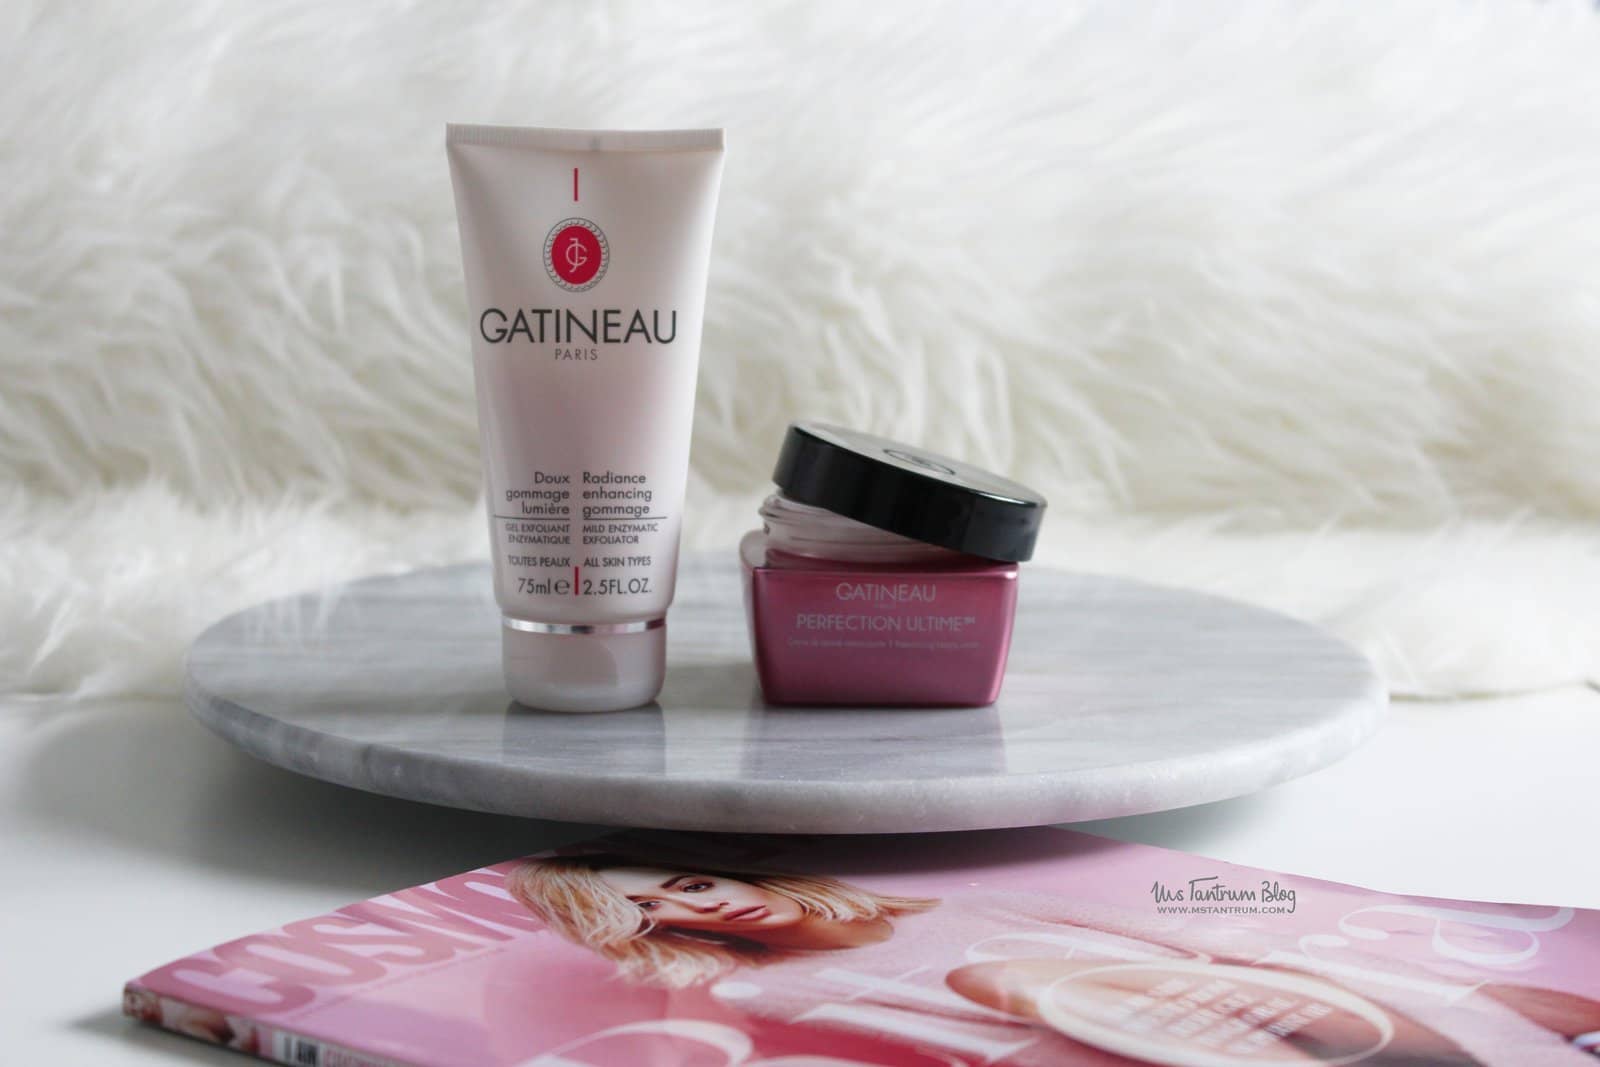 Products for improving skin texture - Gatineau Skincare Review